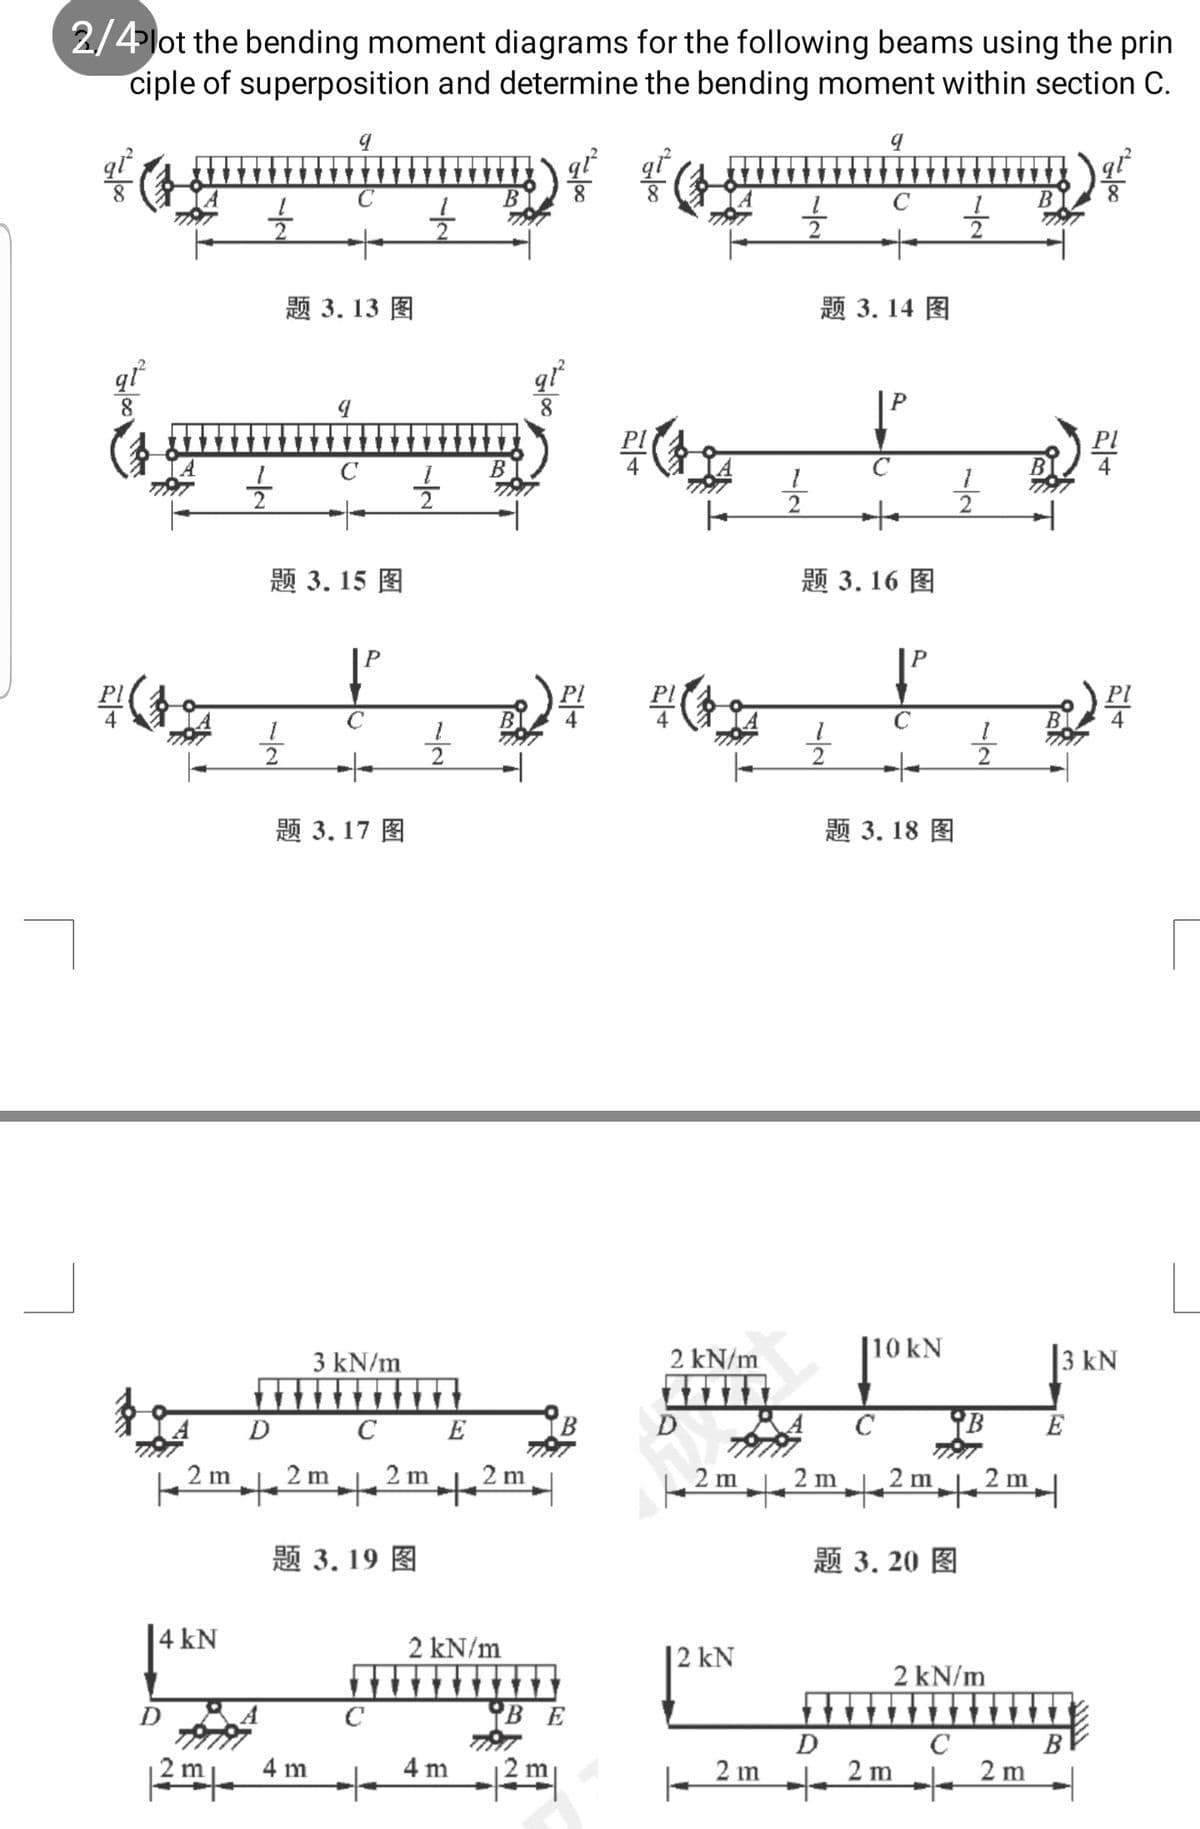 2/4lot the bending moment diagrams for the following beams using the prin
ciple of superposition and determine the bending moment within section C.
В
题 3.13 图
题 3.14 图
qỉ
В
to
题 3.15 图
题3.16 图
BI
2
2
题 3.17 图
题 3.18 图
|10 kN
3 kN/m
2 kN/m
3 kN
D C E
YB
C
E
2 m
to
2 m
2 m
2 m
.2m|
to
2 m
to
2 m
2 m
题3.19 图
题3.20 图
|4 kN
2 kN/m
| 2 kN
2 kN/m
D
C
B E
D
C B
4 m2|
- 2 m
de 2 m
2 m
2m. 4 m
/-
